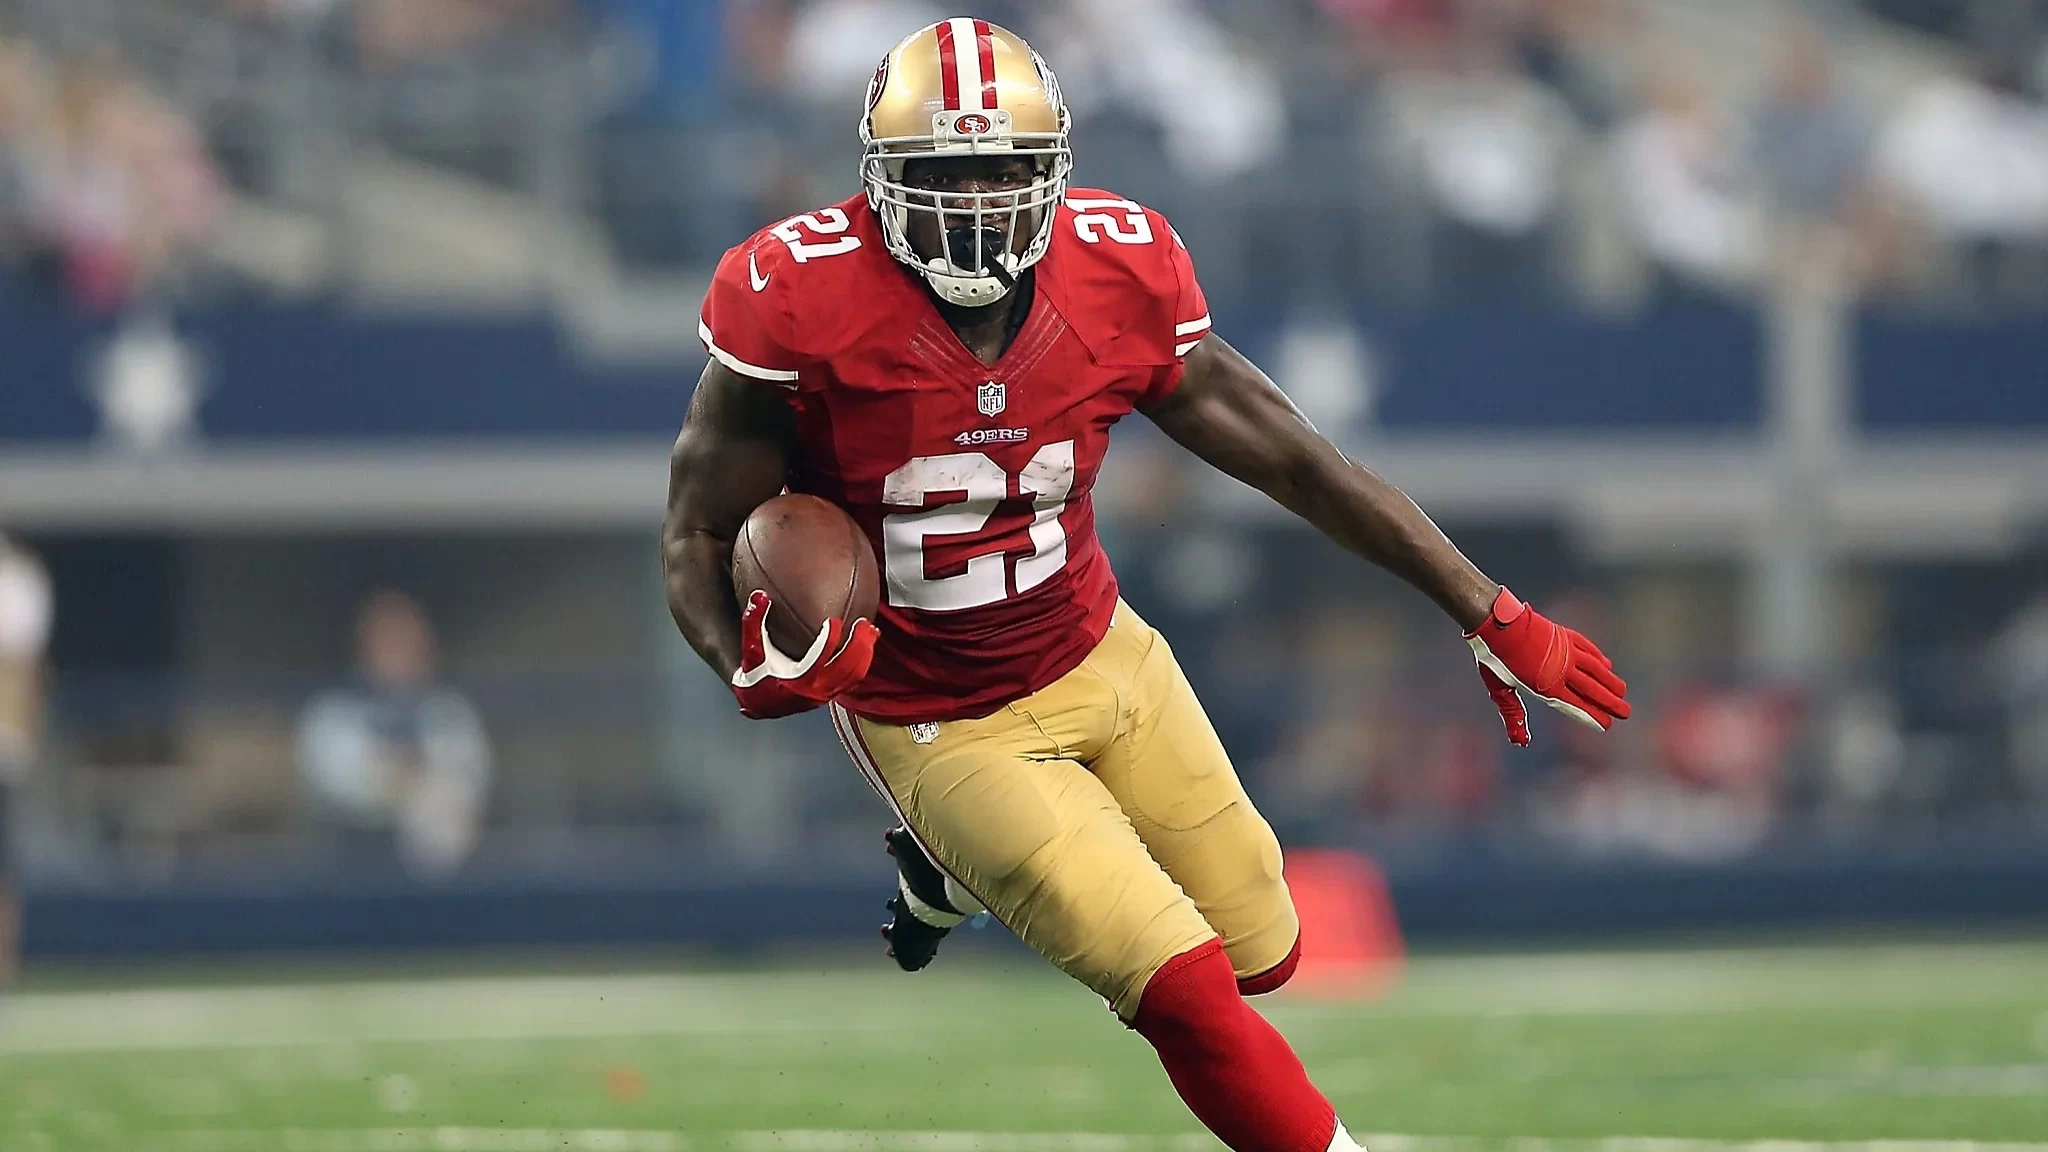 NFL Legend Frank Gore Returns to 49ers in New Front Office Role